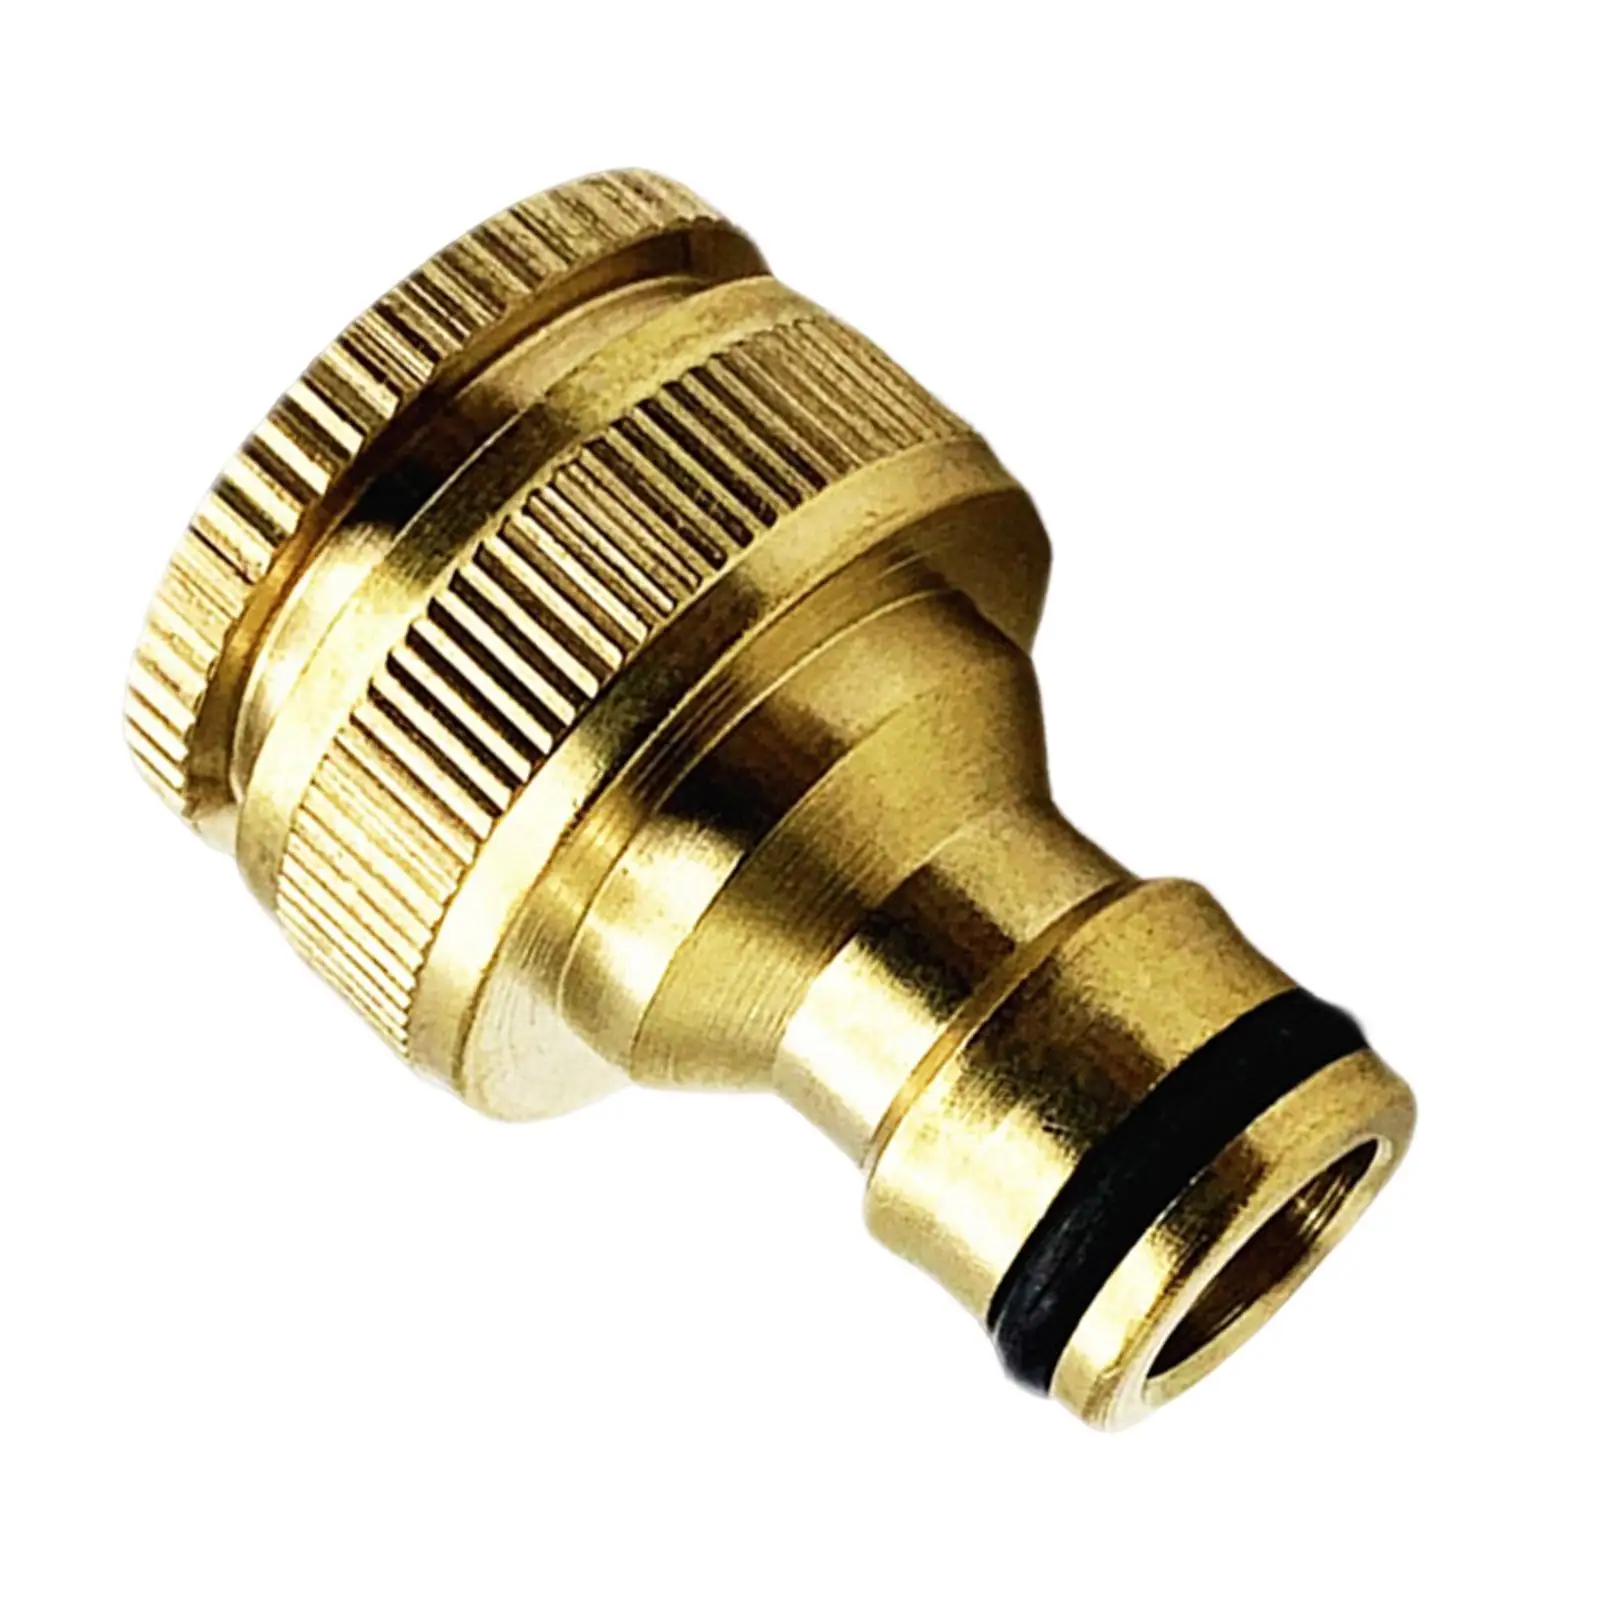 Brass Fitting Conversion Adapter Durable Sturdy for High Pressure Washer